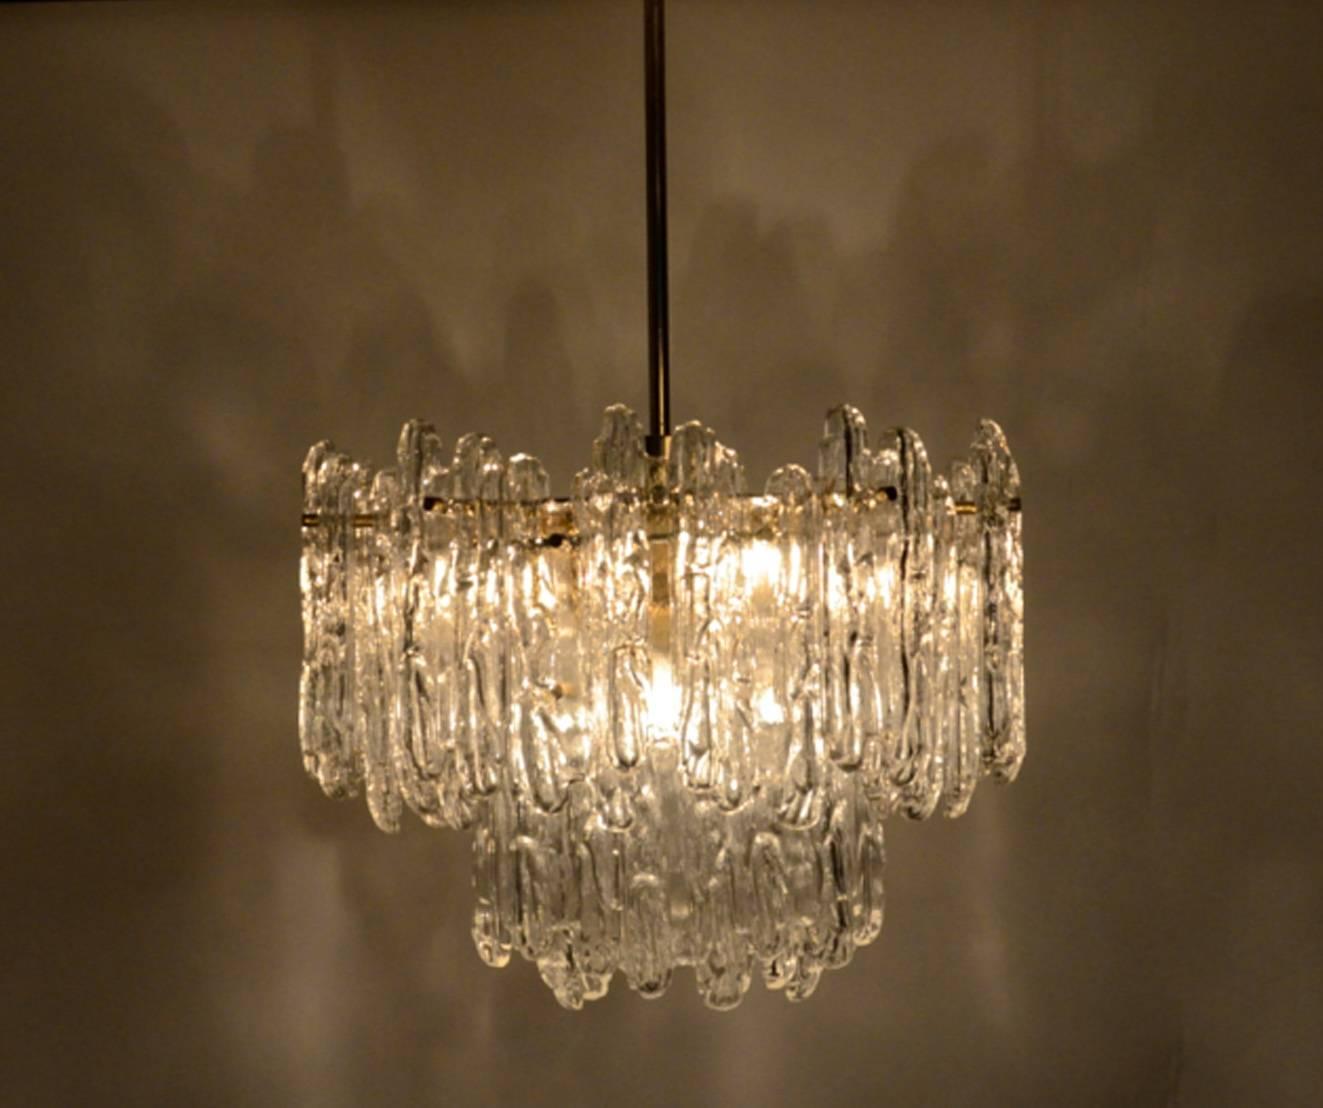 This modernist iceglass chandelier with 30 glasses was designed by the Kinkeldey design team during the 1970s, and manufactured in Germany. A very elegant Kinkeldey chandelier, it is comfortable with all decor periods. The pattern of the glass